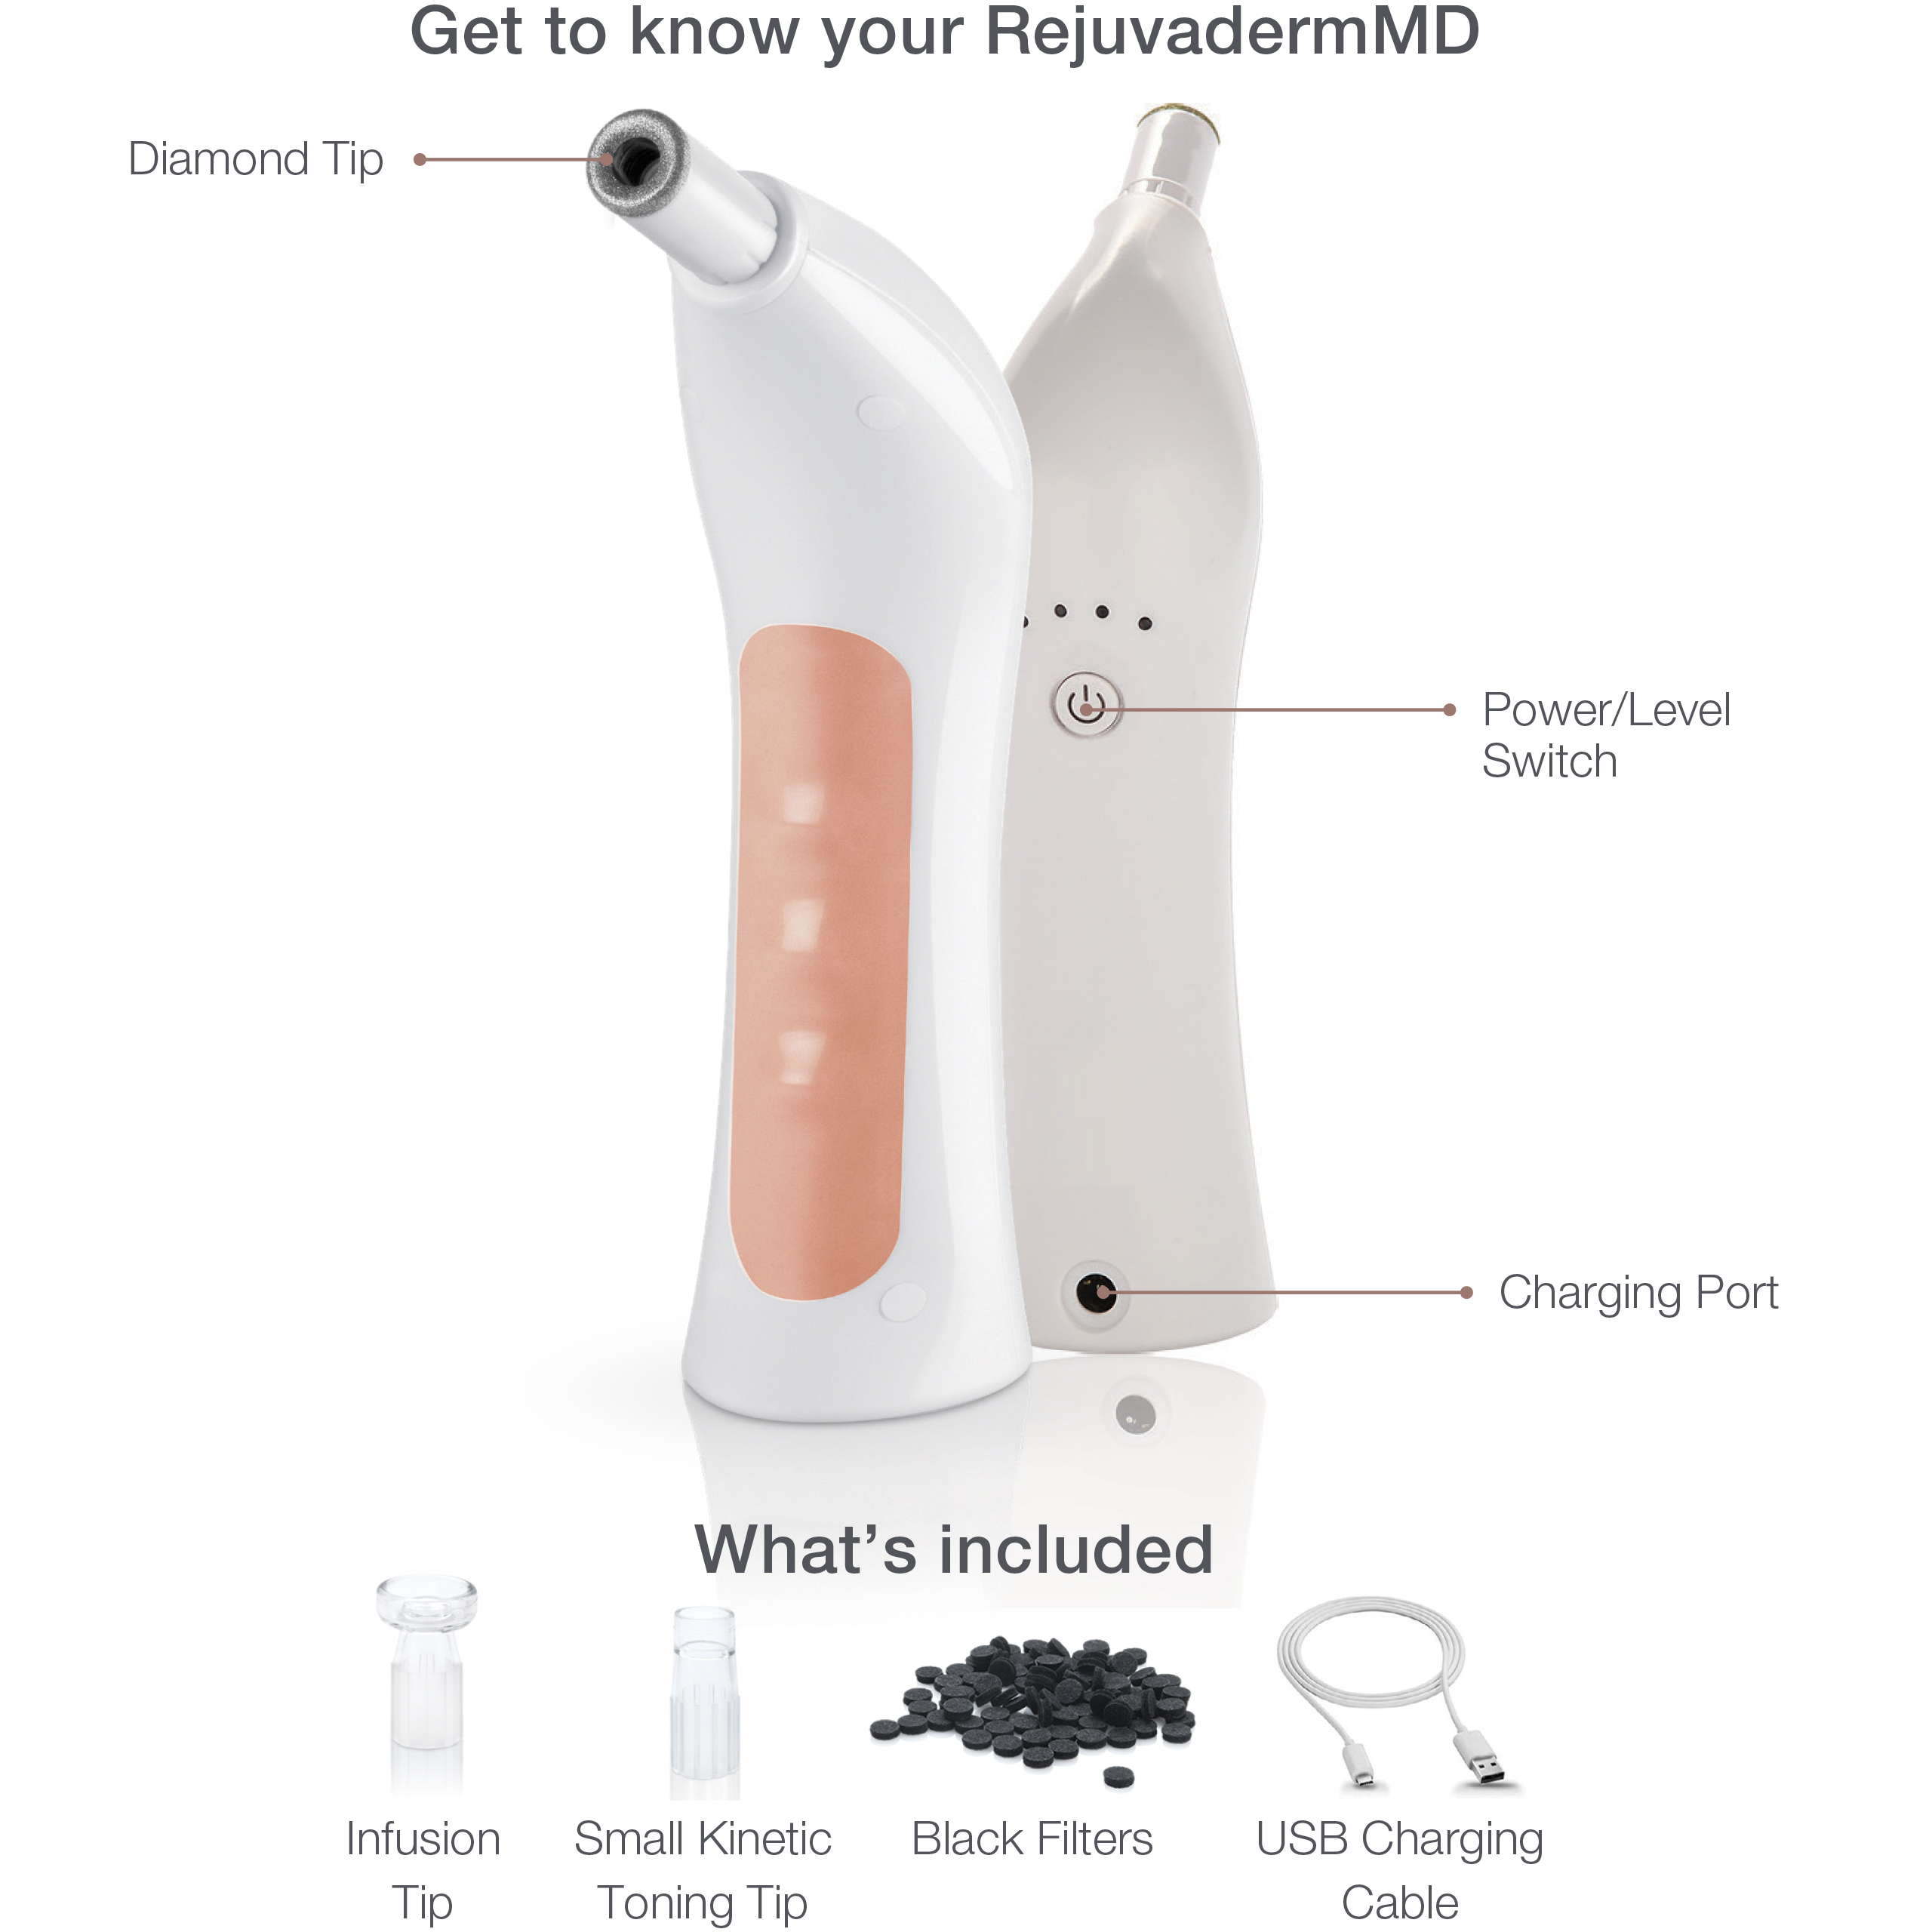 Trophy Skin RejuvadermMD Microdermabrasion Machine - Spa-Quality Diamond Tip and Rechargeable Battery Delivers On-The-Go Professional Dermabrasion Facial Treatments for Radiant Skin & Reduced Wrinkles - image 2 of 7